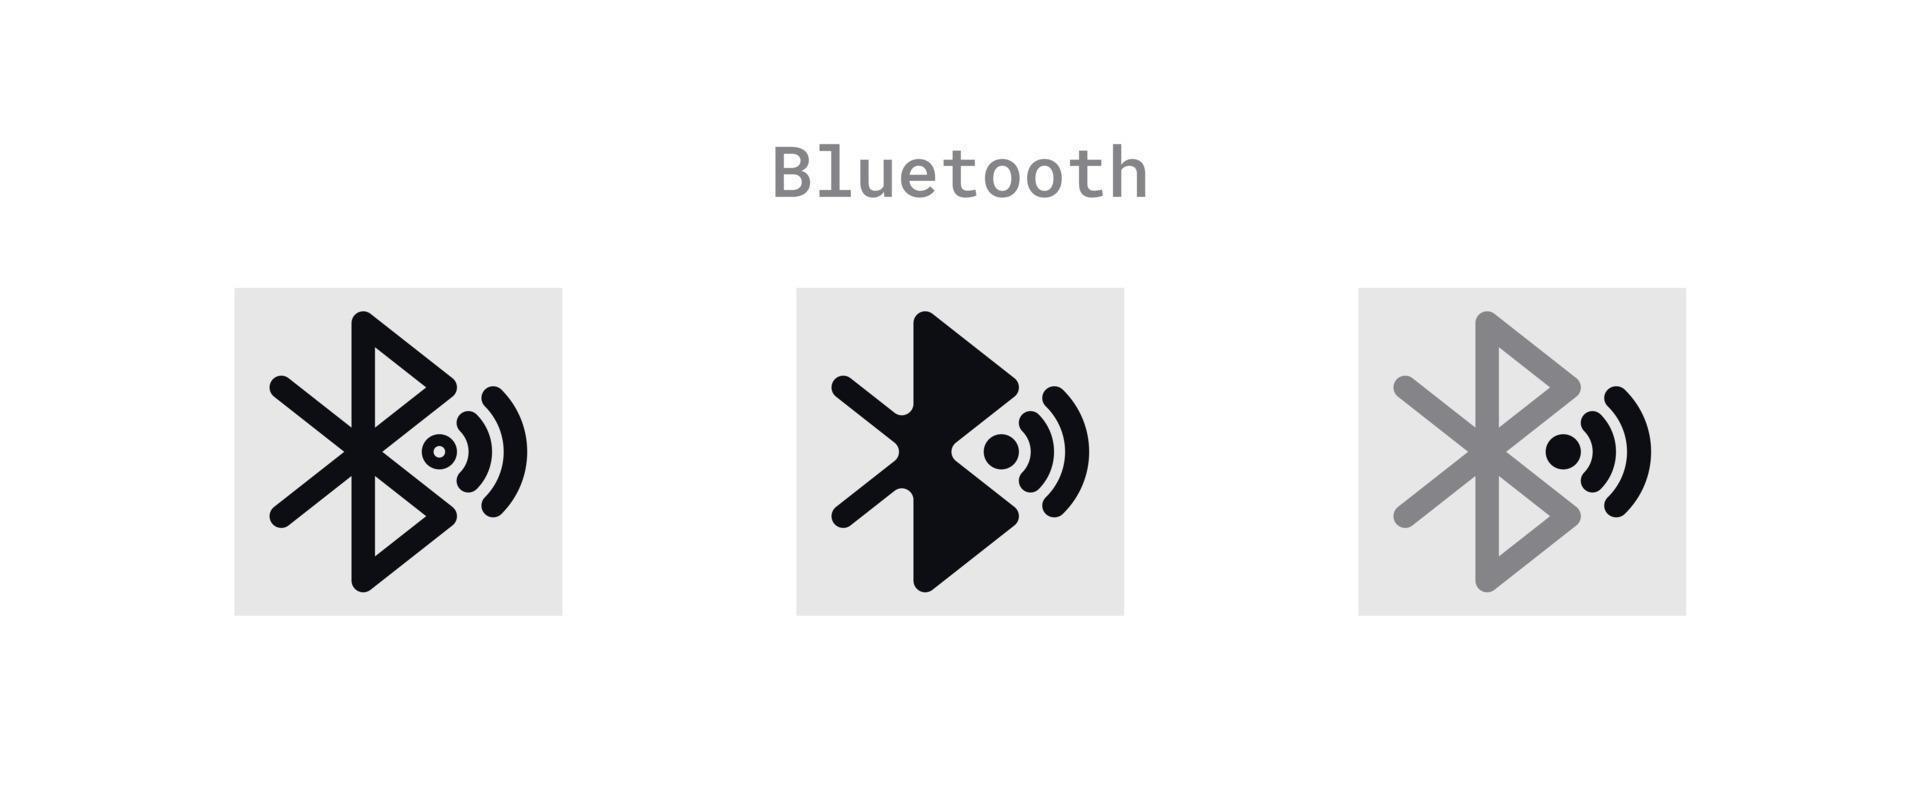 Bluetooth Icons Sheet vector